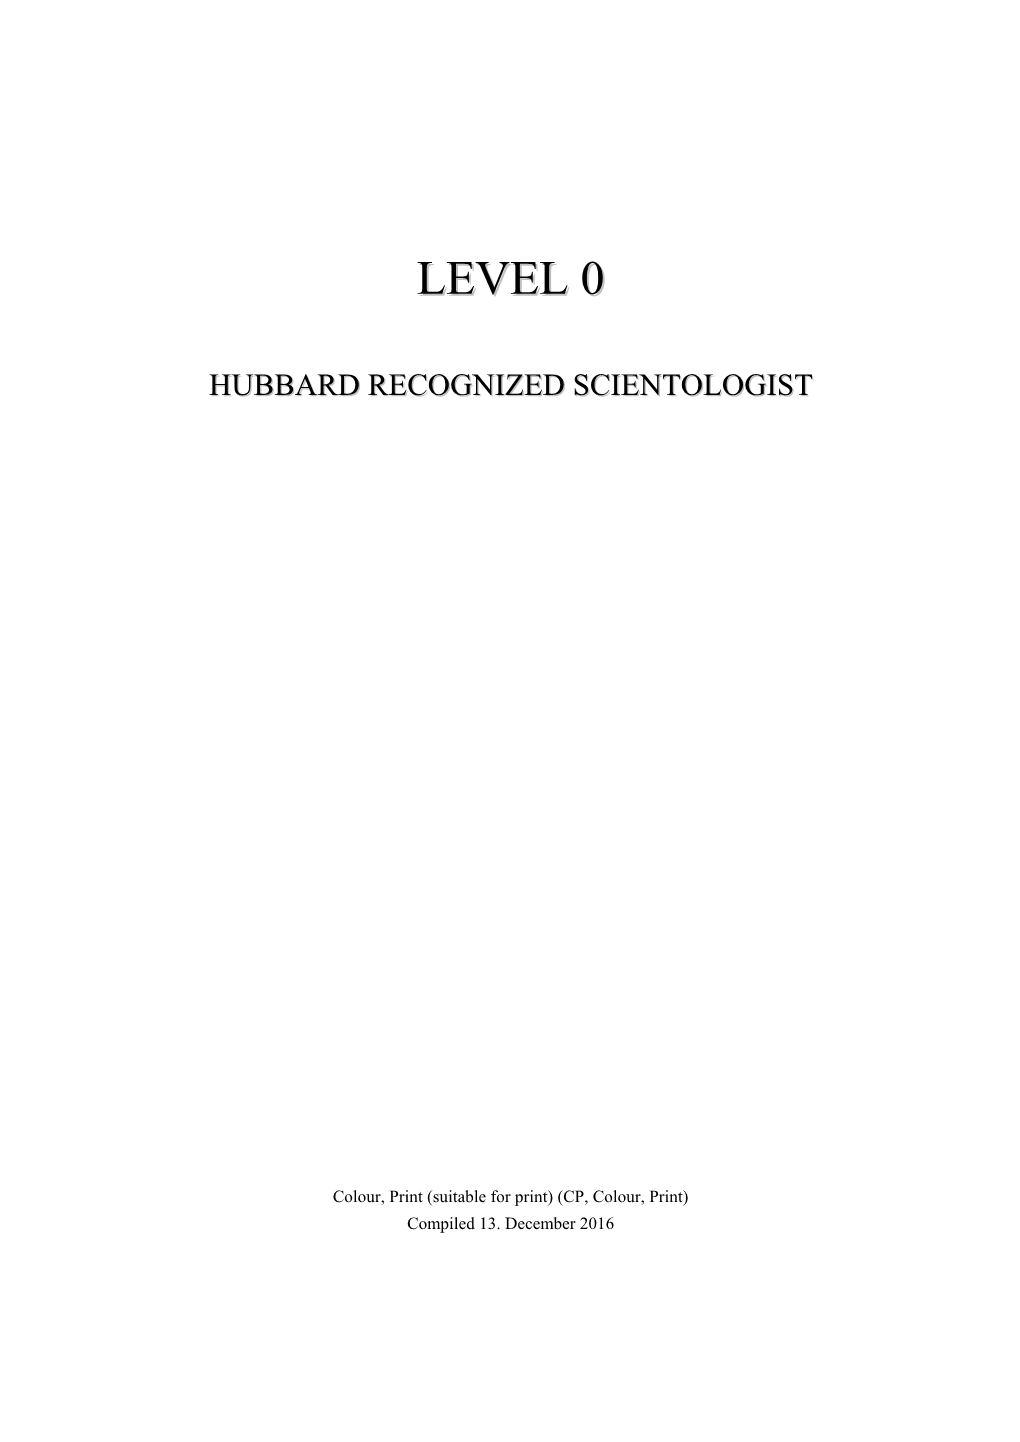 LEVEL 0 II HUBBARD RECOGNIZED SCIENTOLOGIST A) Table of Contents, in Checksheet Order